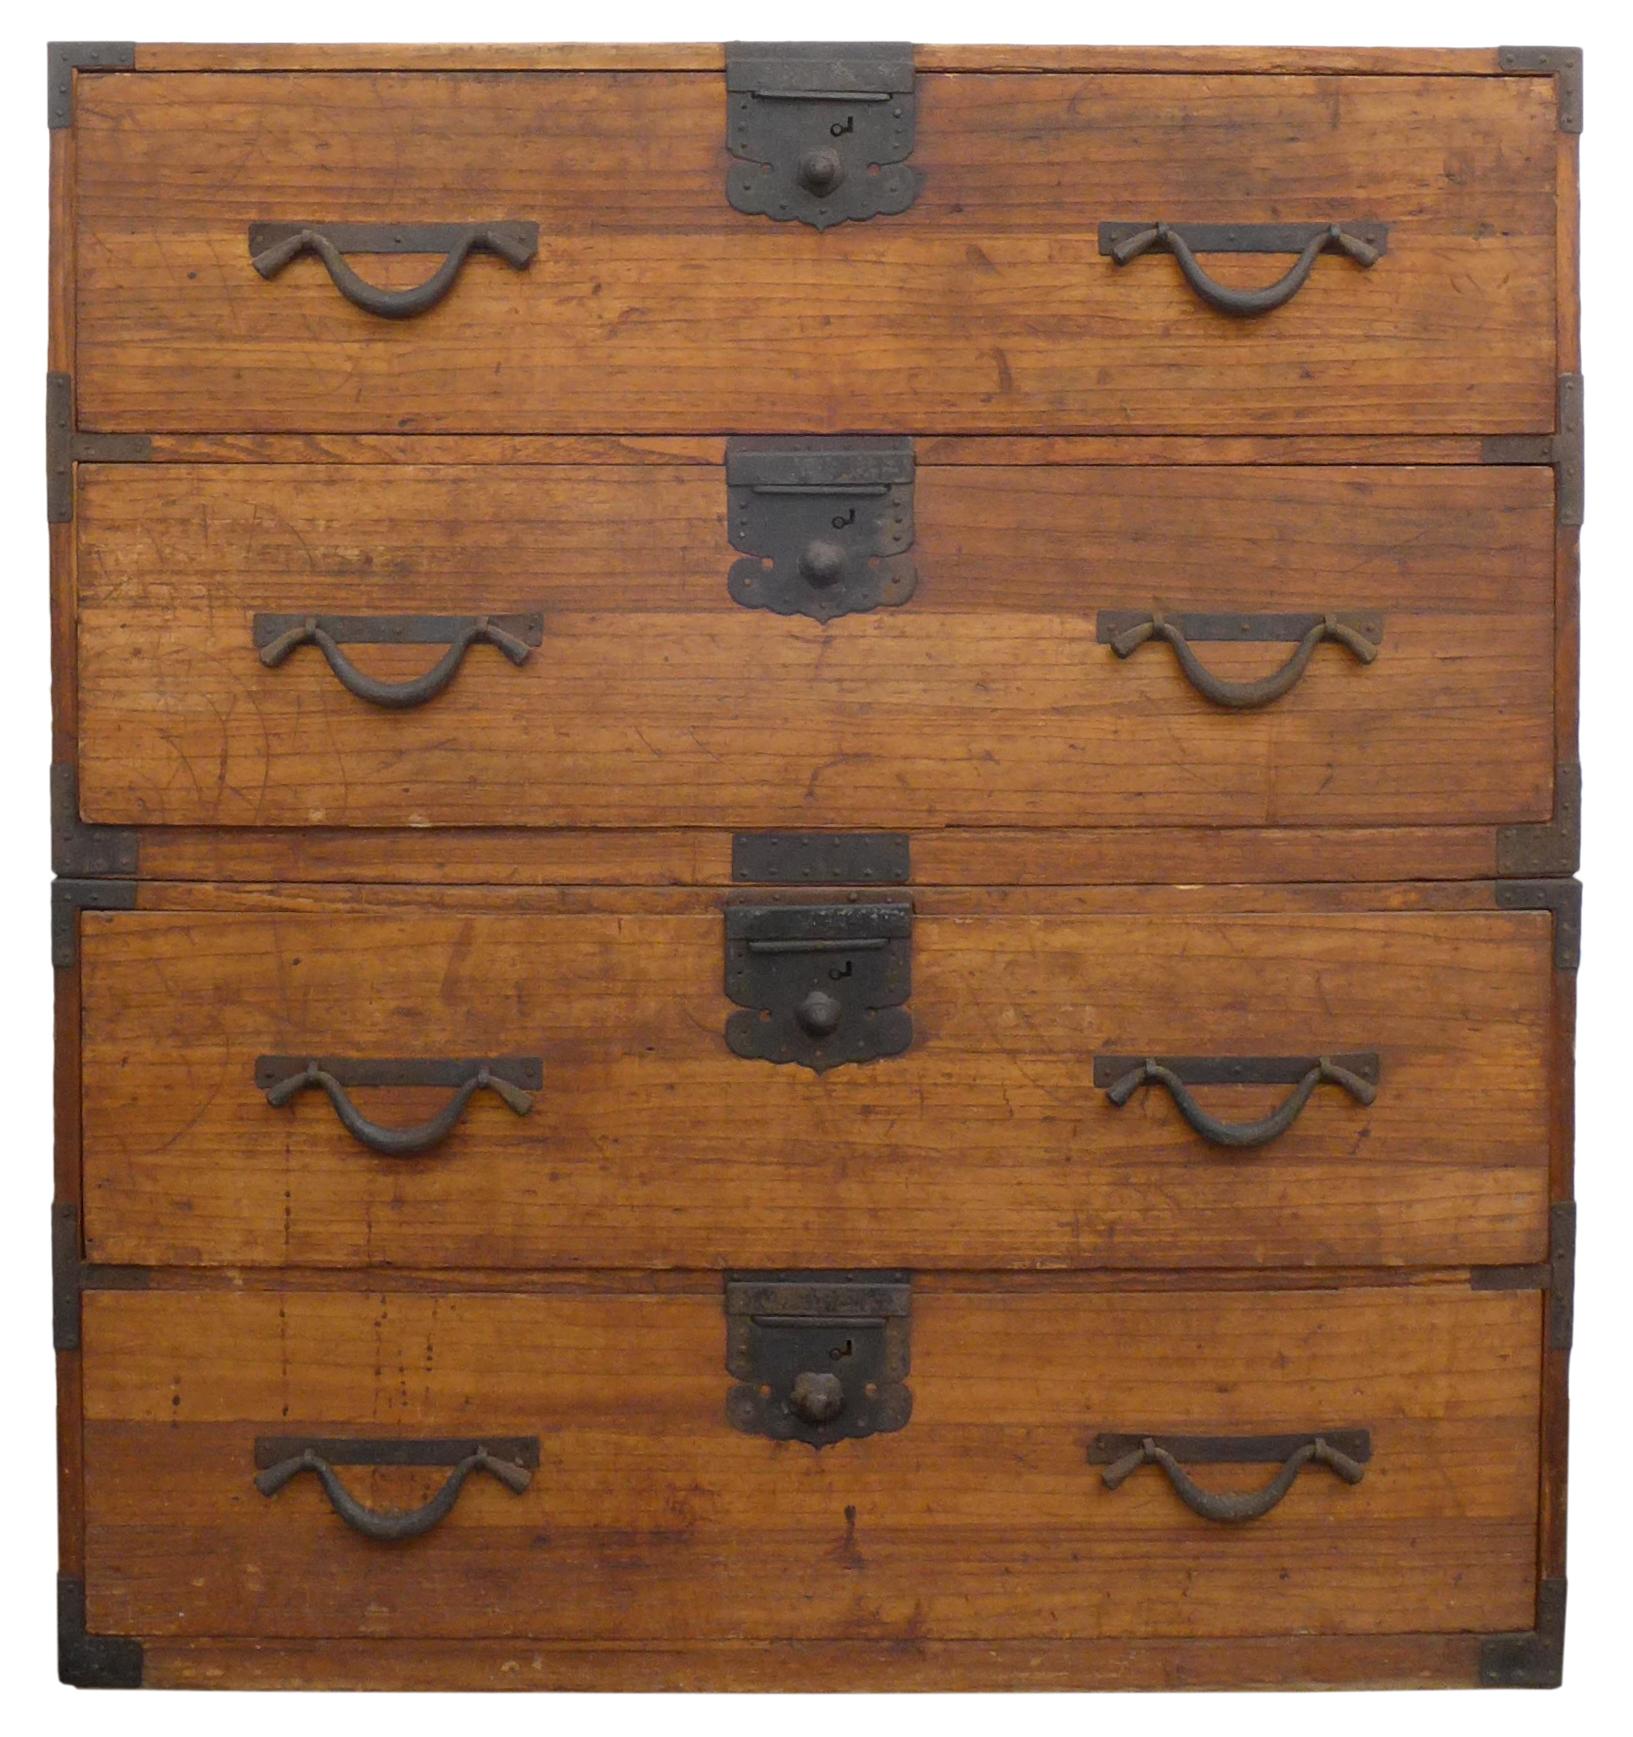 Wonderful, early 20th century, stacking Japanese tansu chests. Great, vintage examples of this traditional mobile storage cabinetry wearing all its trademarks. All original iron hardware and wood nails. Side handles on each piece for ease of